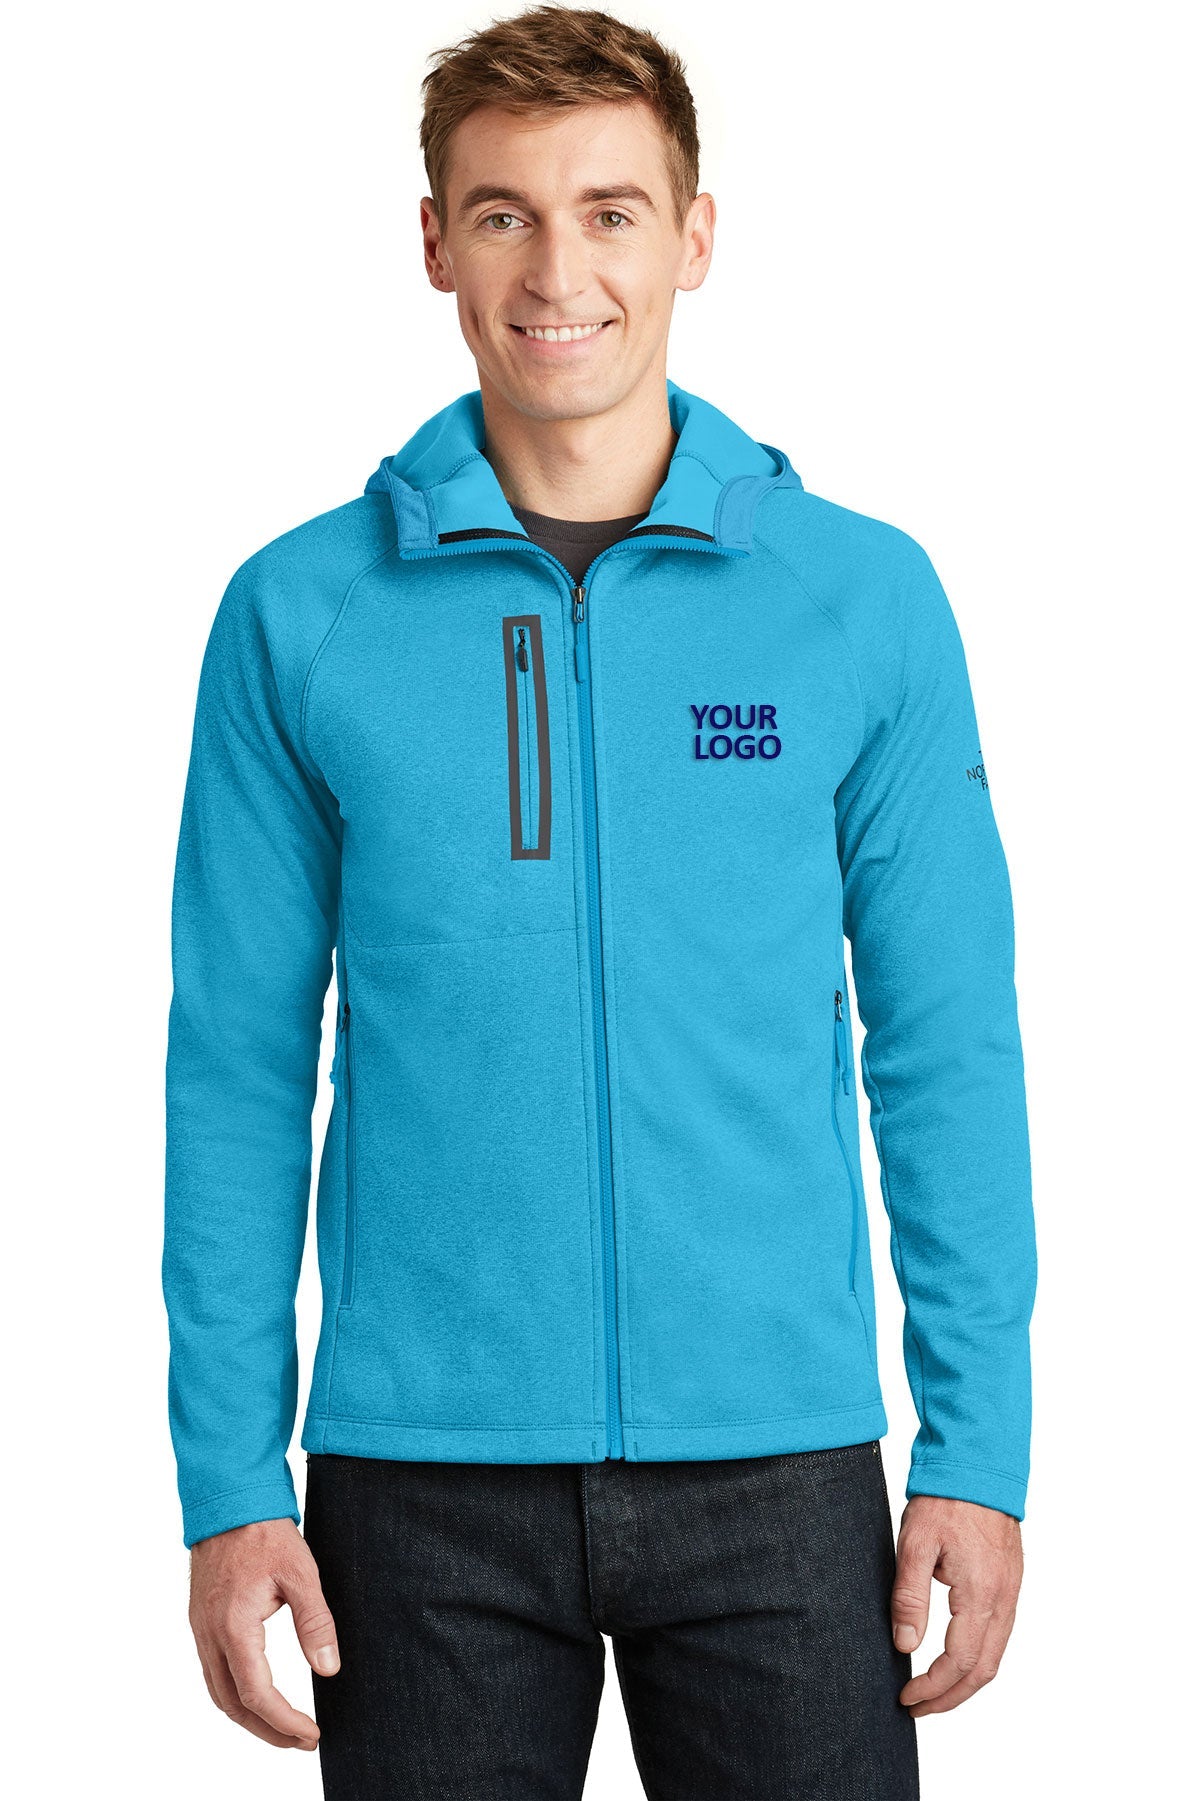 The North Face Hyper Blue Heather NF0A3LHH promotional jackets company logo